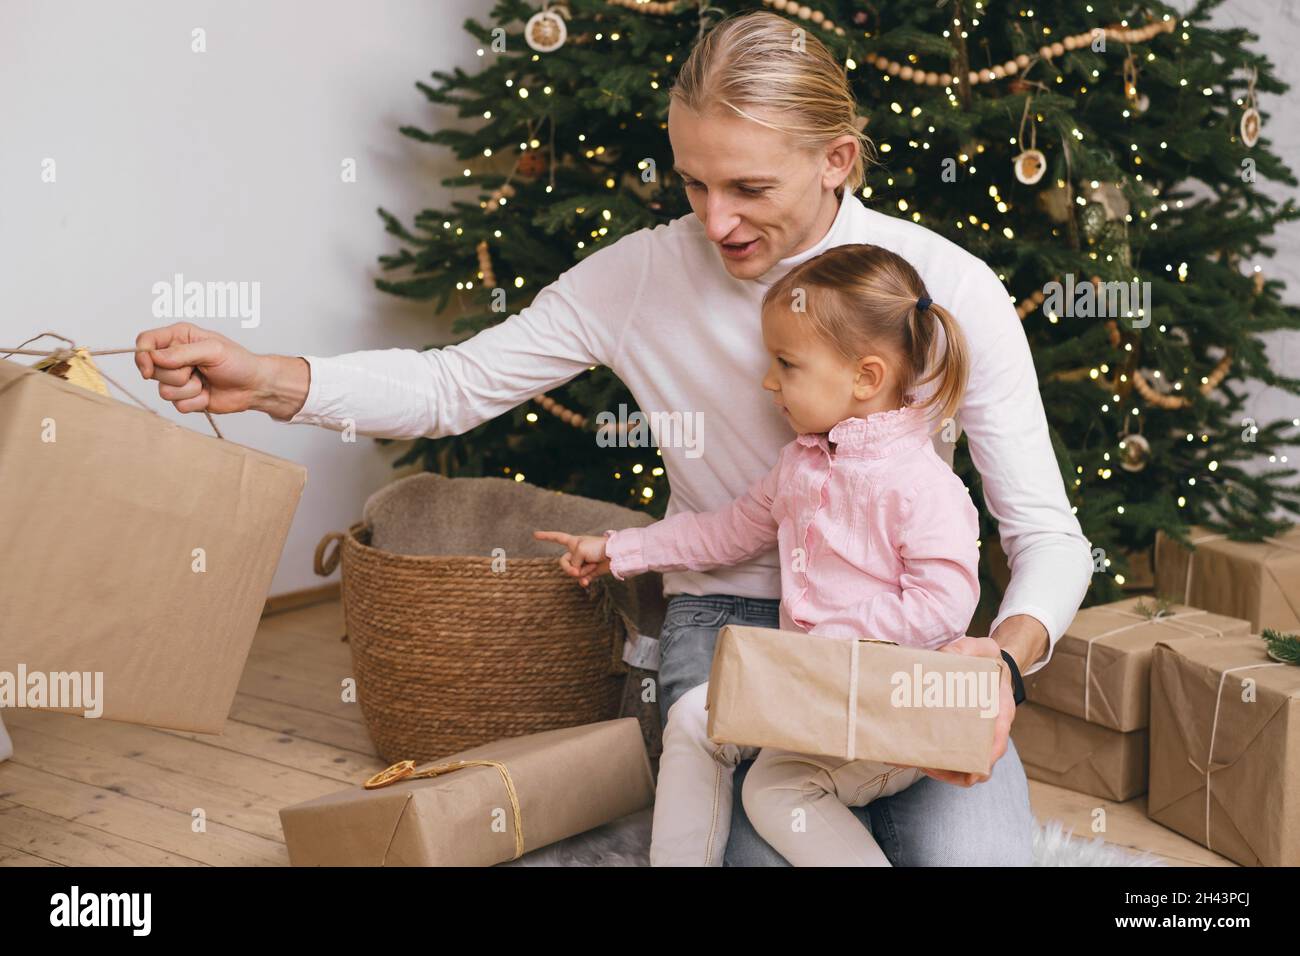 Father with child getting ready for Christmas, wrapping gift boxes near tree. Happy family dreaming of celebrations and presents at stylish Stock Photo